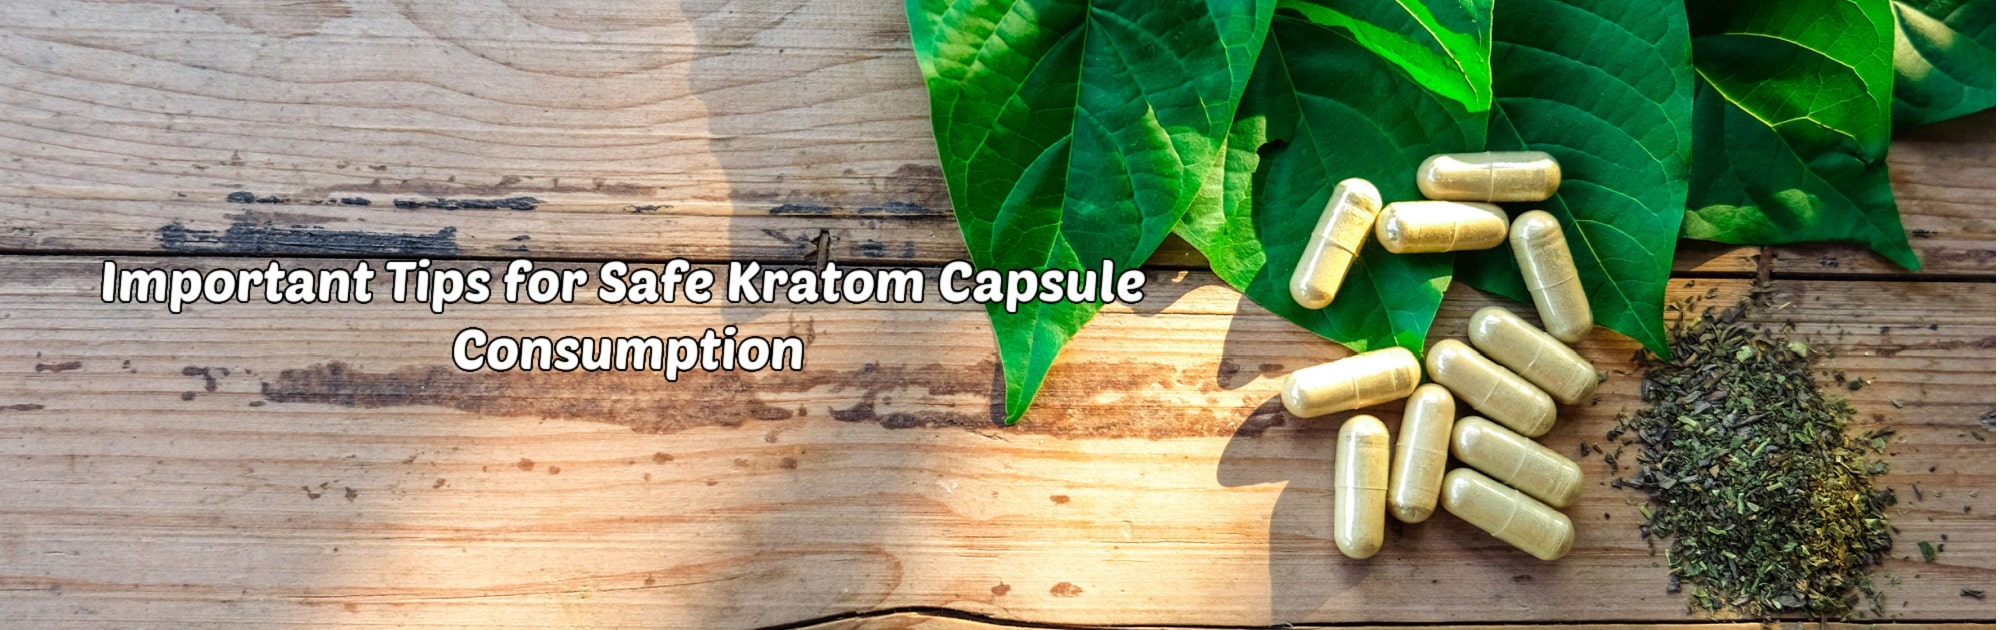 image of important tips for safe kratom capsule consumption